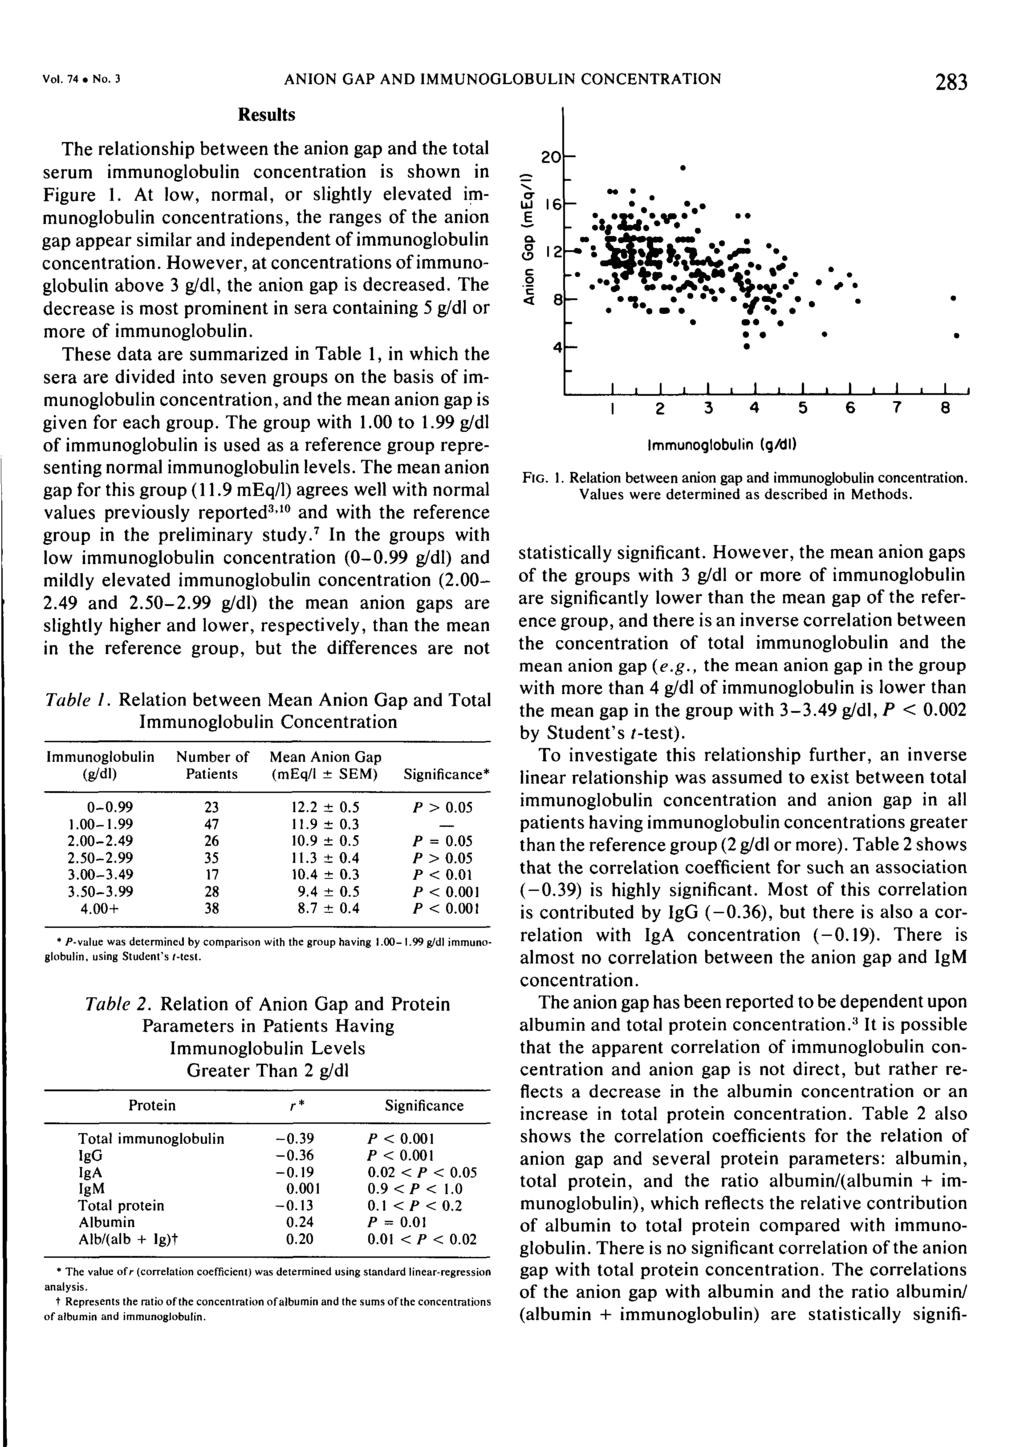 Vol. 74 No. 3 ANION GAP AND IMMUNOGLOBULIN CONCENTRATION 23 Results The relationship between the anion gap and the total serum immunoglobulin concentration is shown in Figure 1.